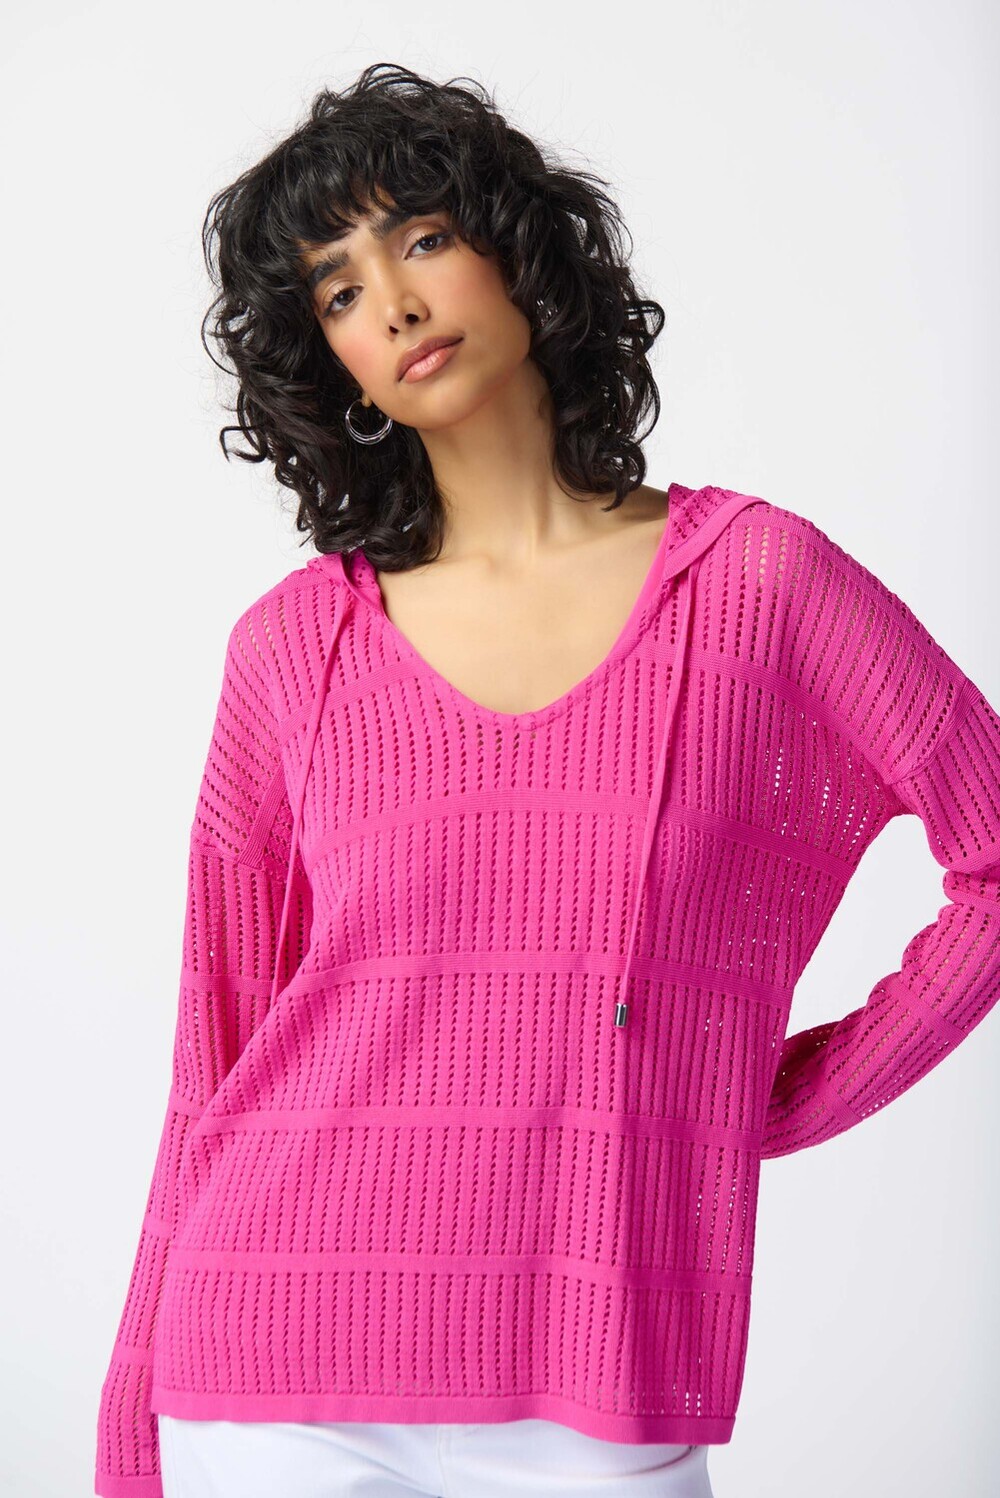 Perforated Crochet Top Style 241923. Ultra Pink